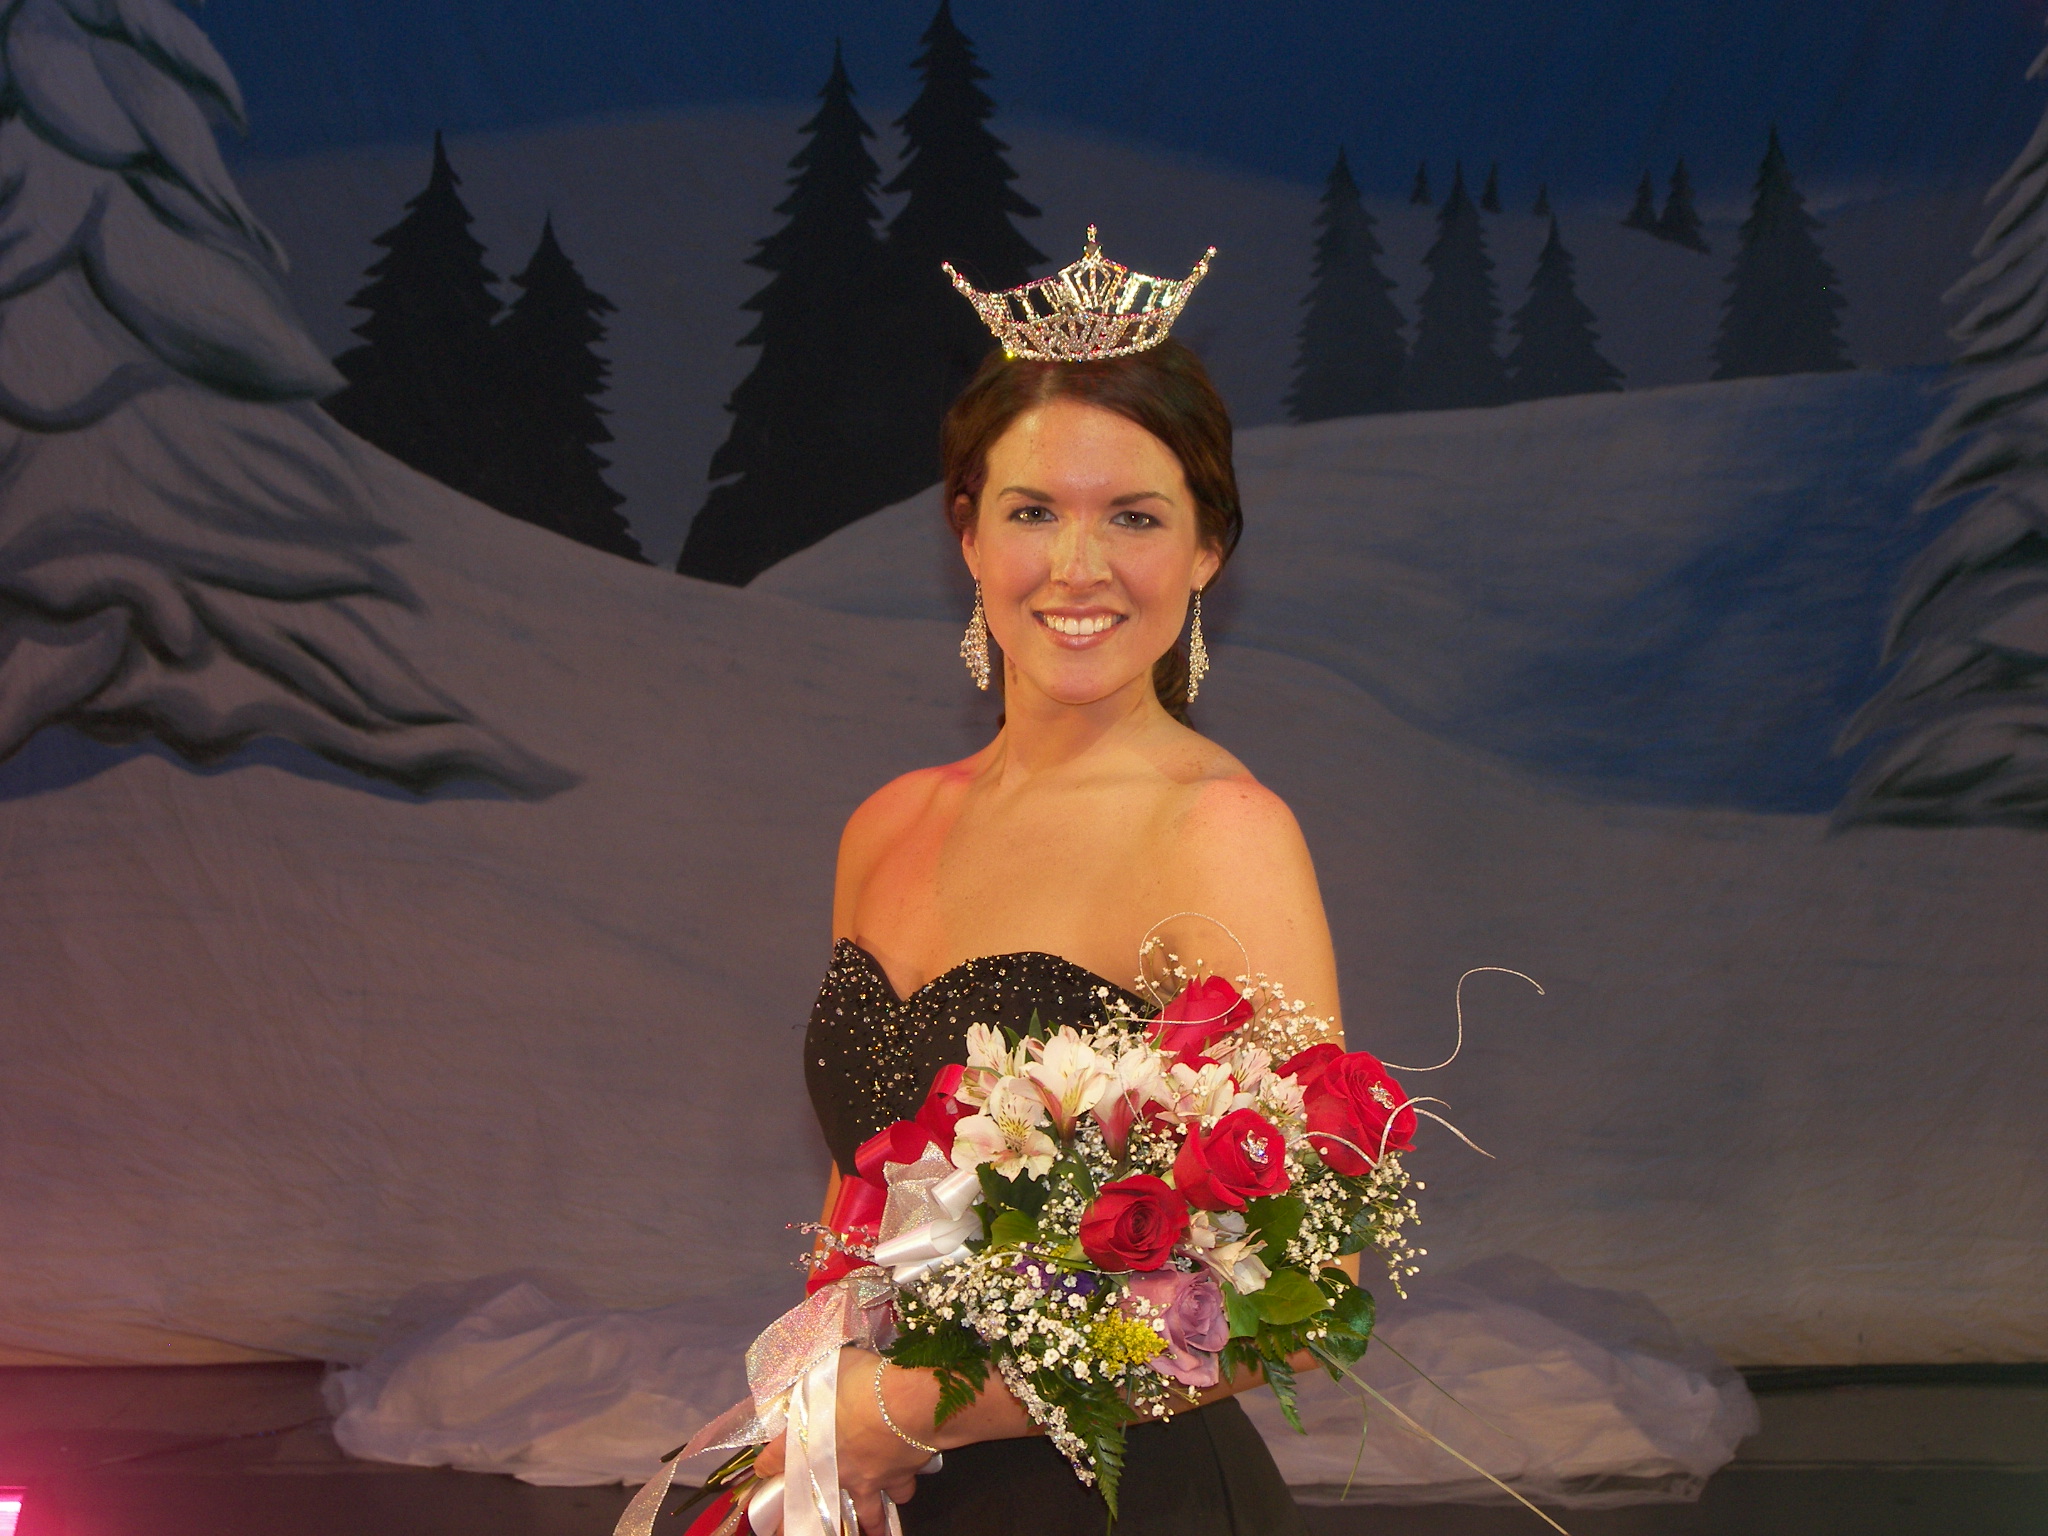 Kimberly Sawyer, Miss Door County, who later in June 2010 won the Miss Wisconsin title.